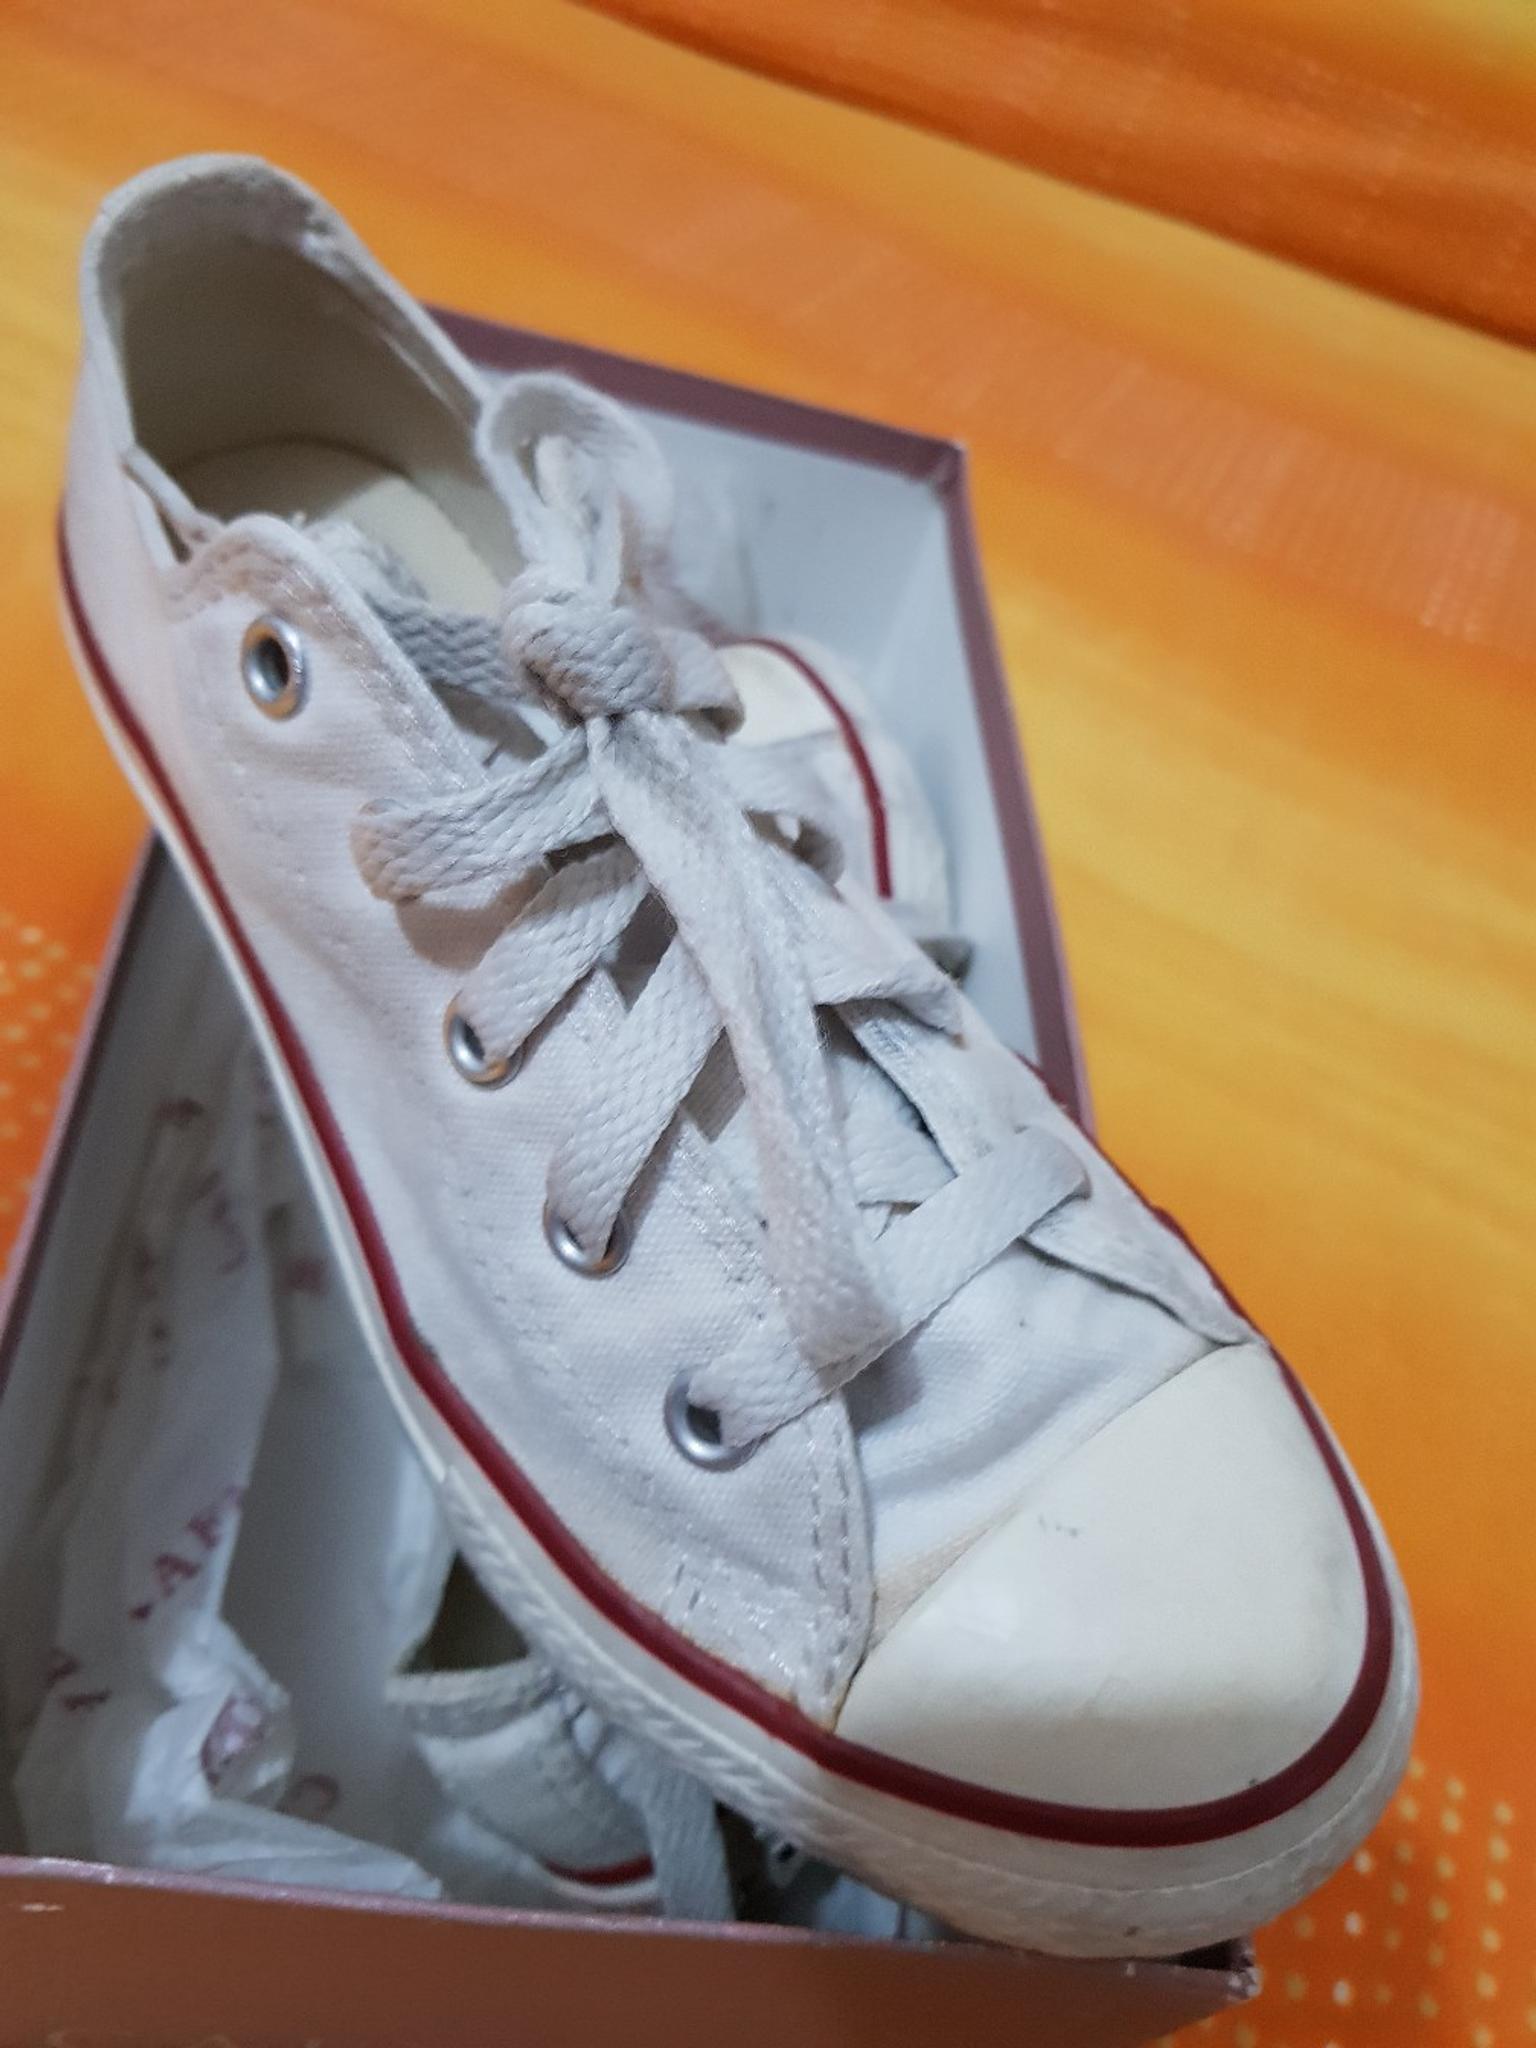 Converse bianche nr 32 in 80021 San Pietro a Patierno for €20.00 for sale |  Shpock